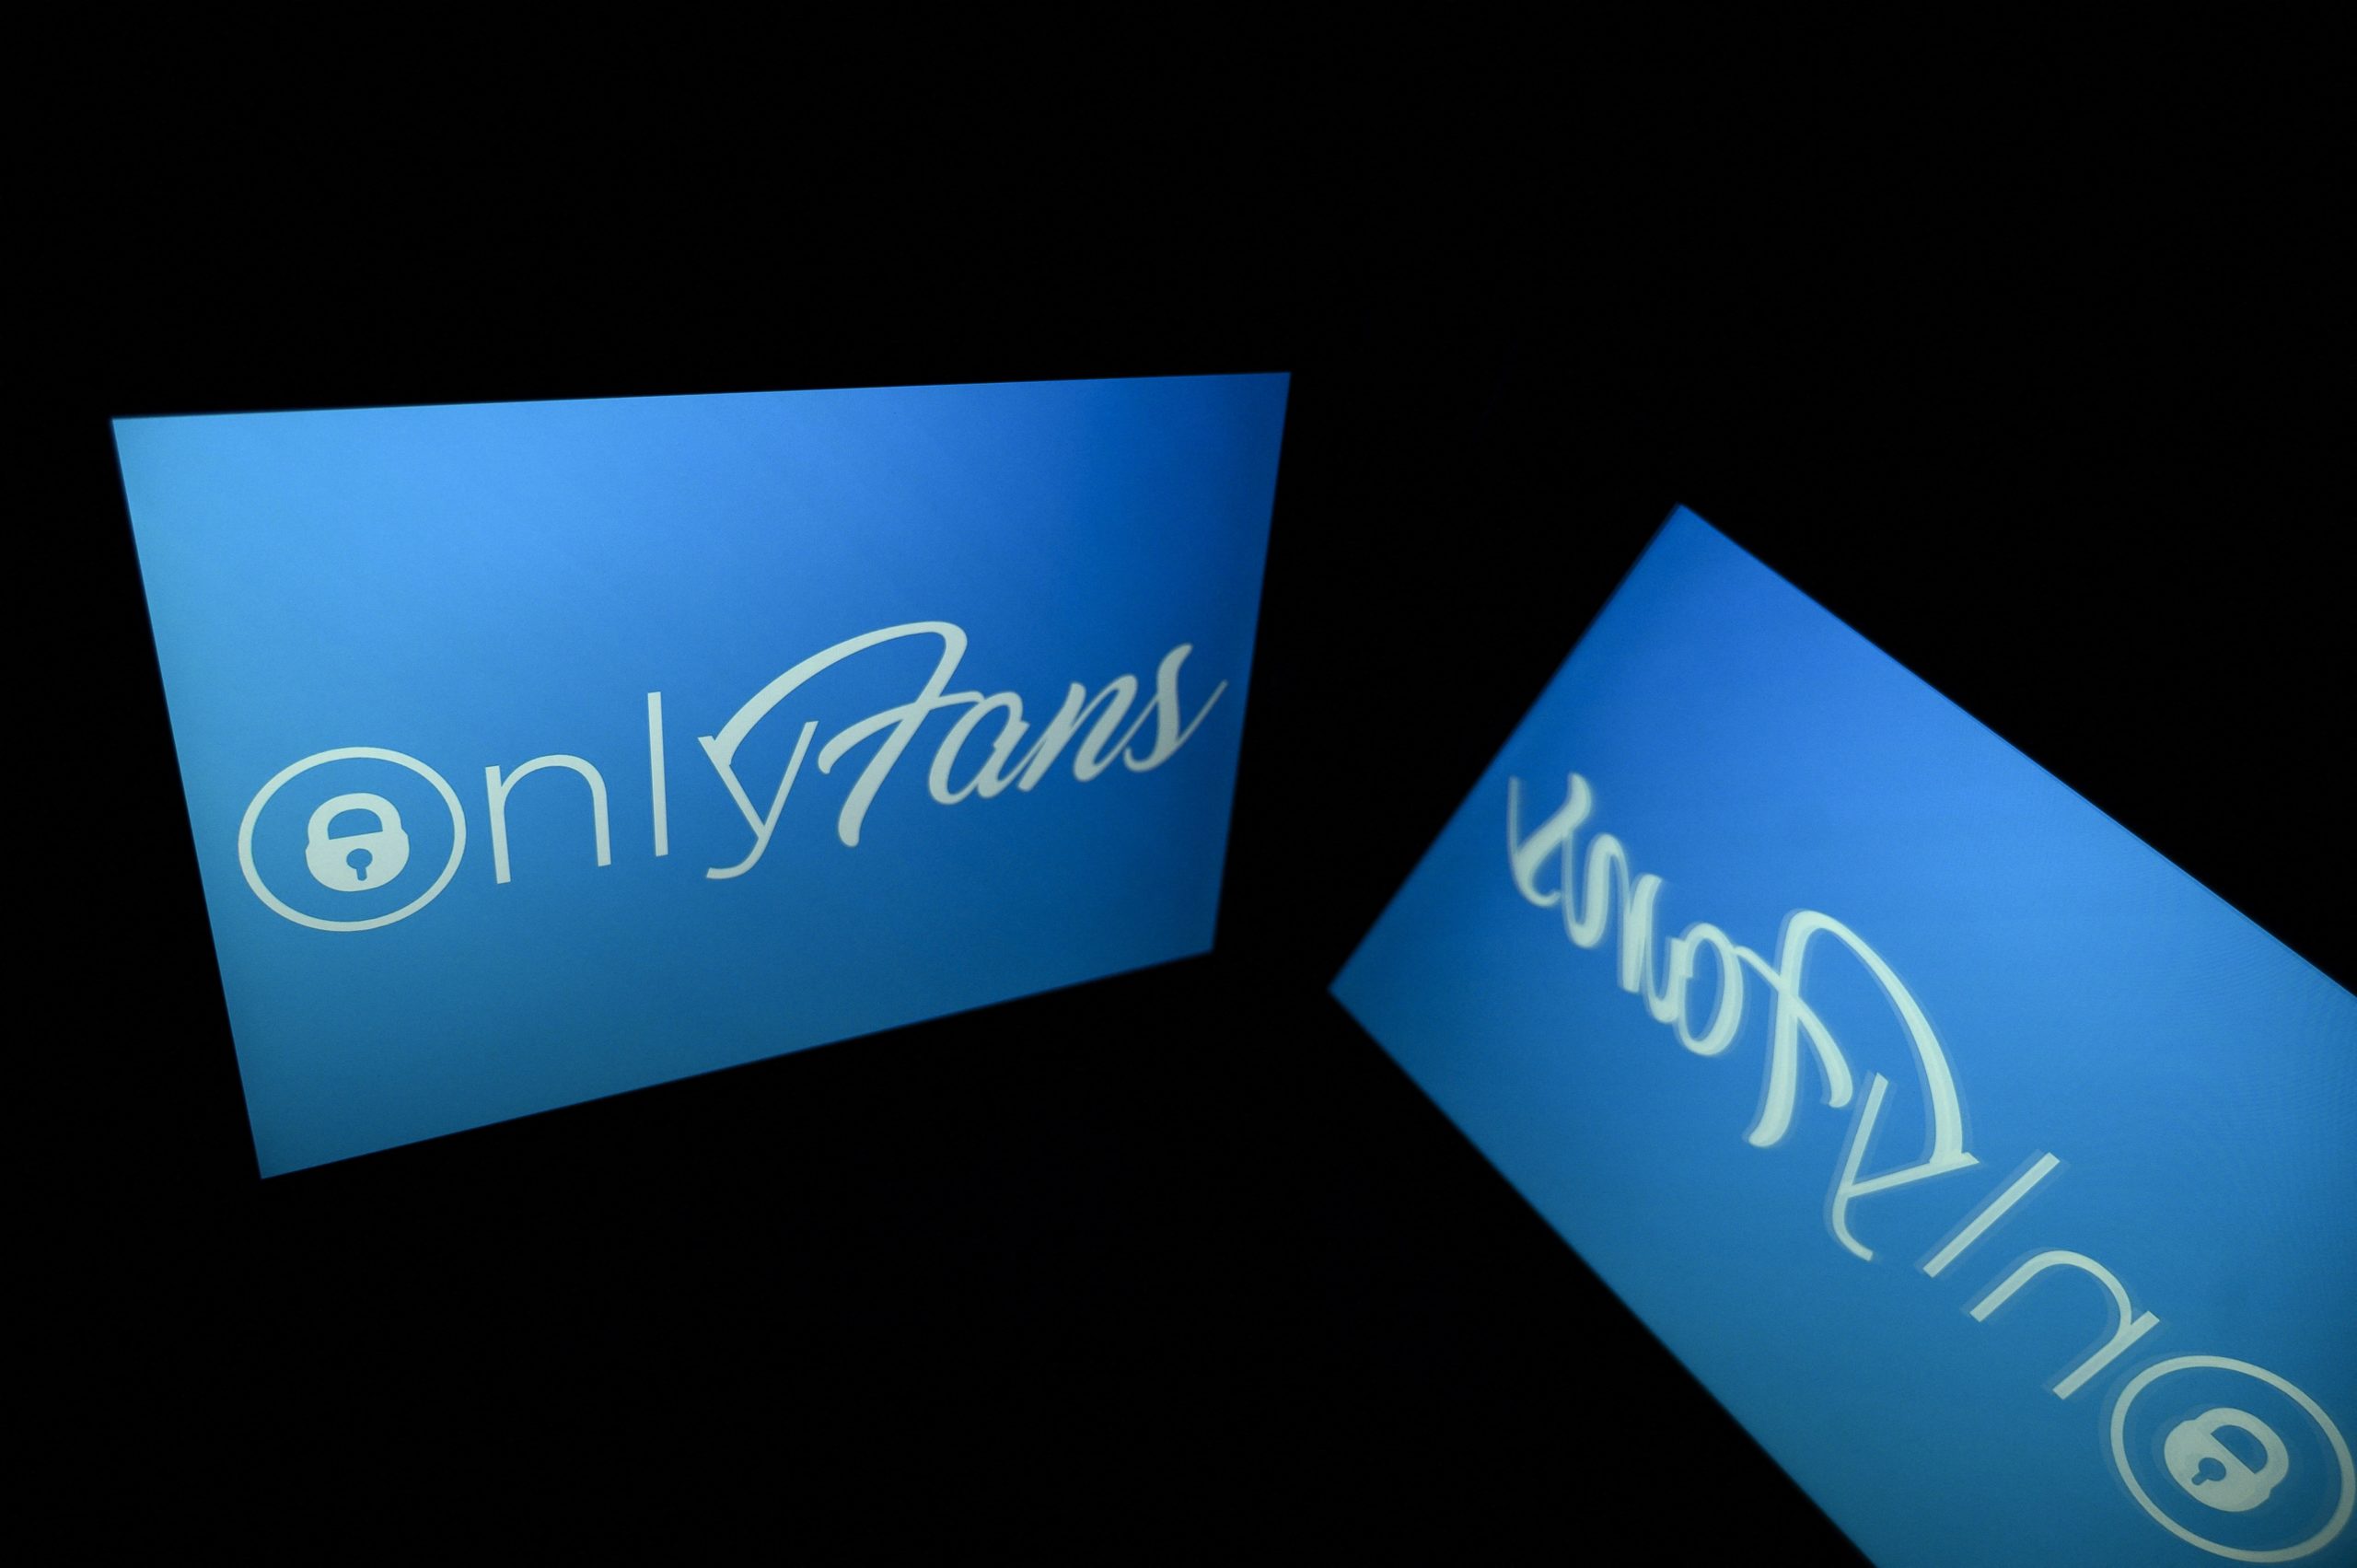 A picture taken on October 5, 2021 in Toulouse shows the logo of Onlyfans social media displayed by a tablet. (Photo by LIONEL BONAVENTURE/AFP via Getty Images)